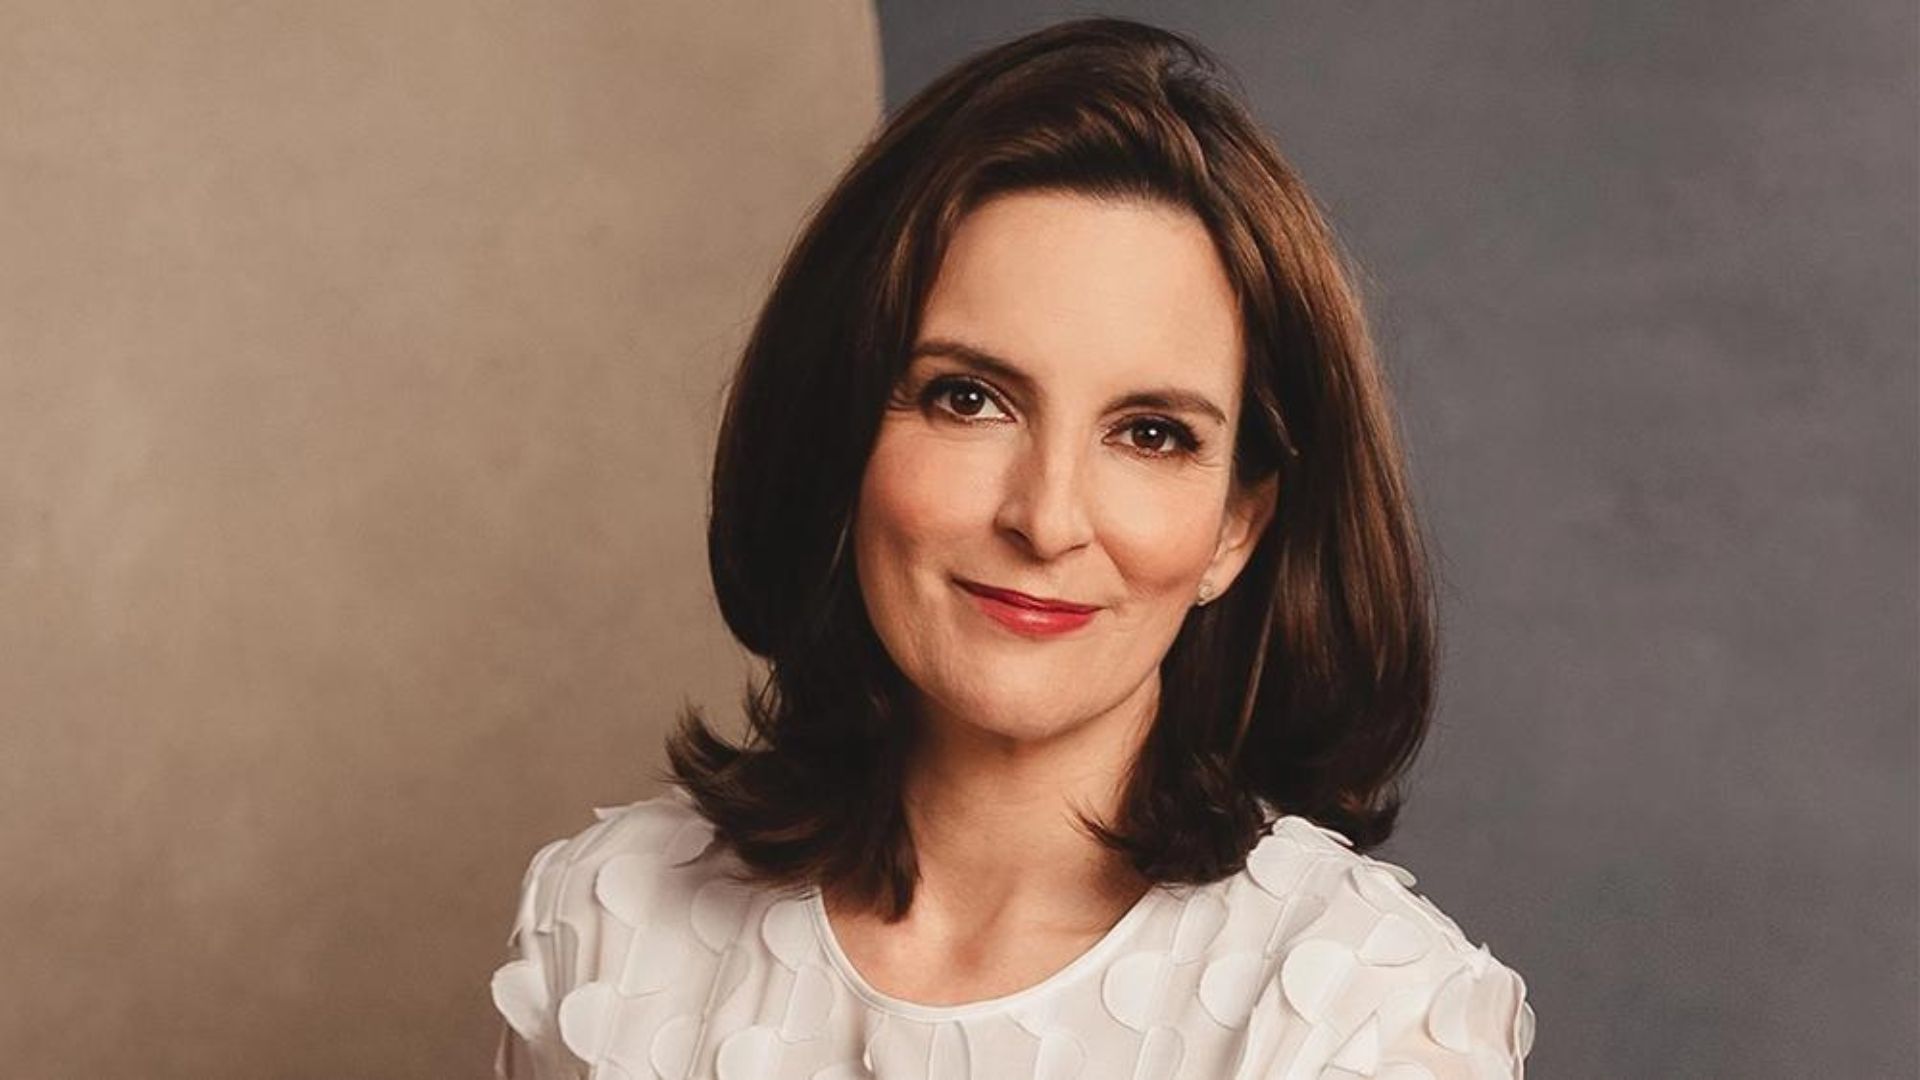 Tina Fey Smiling And Wearing White Clothes